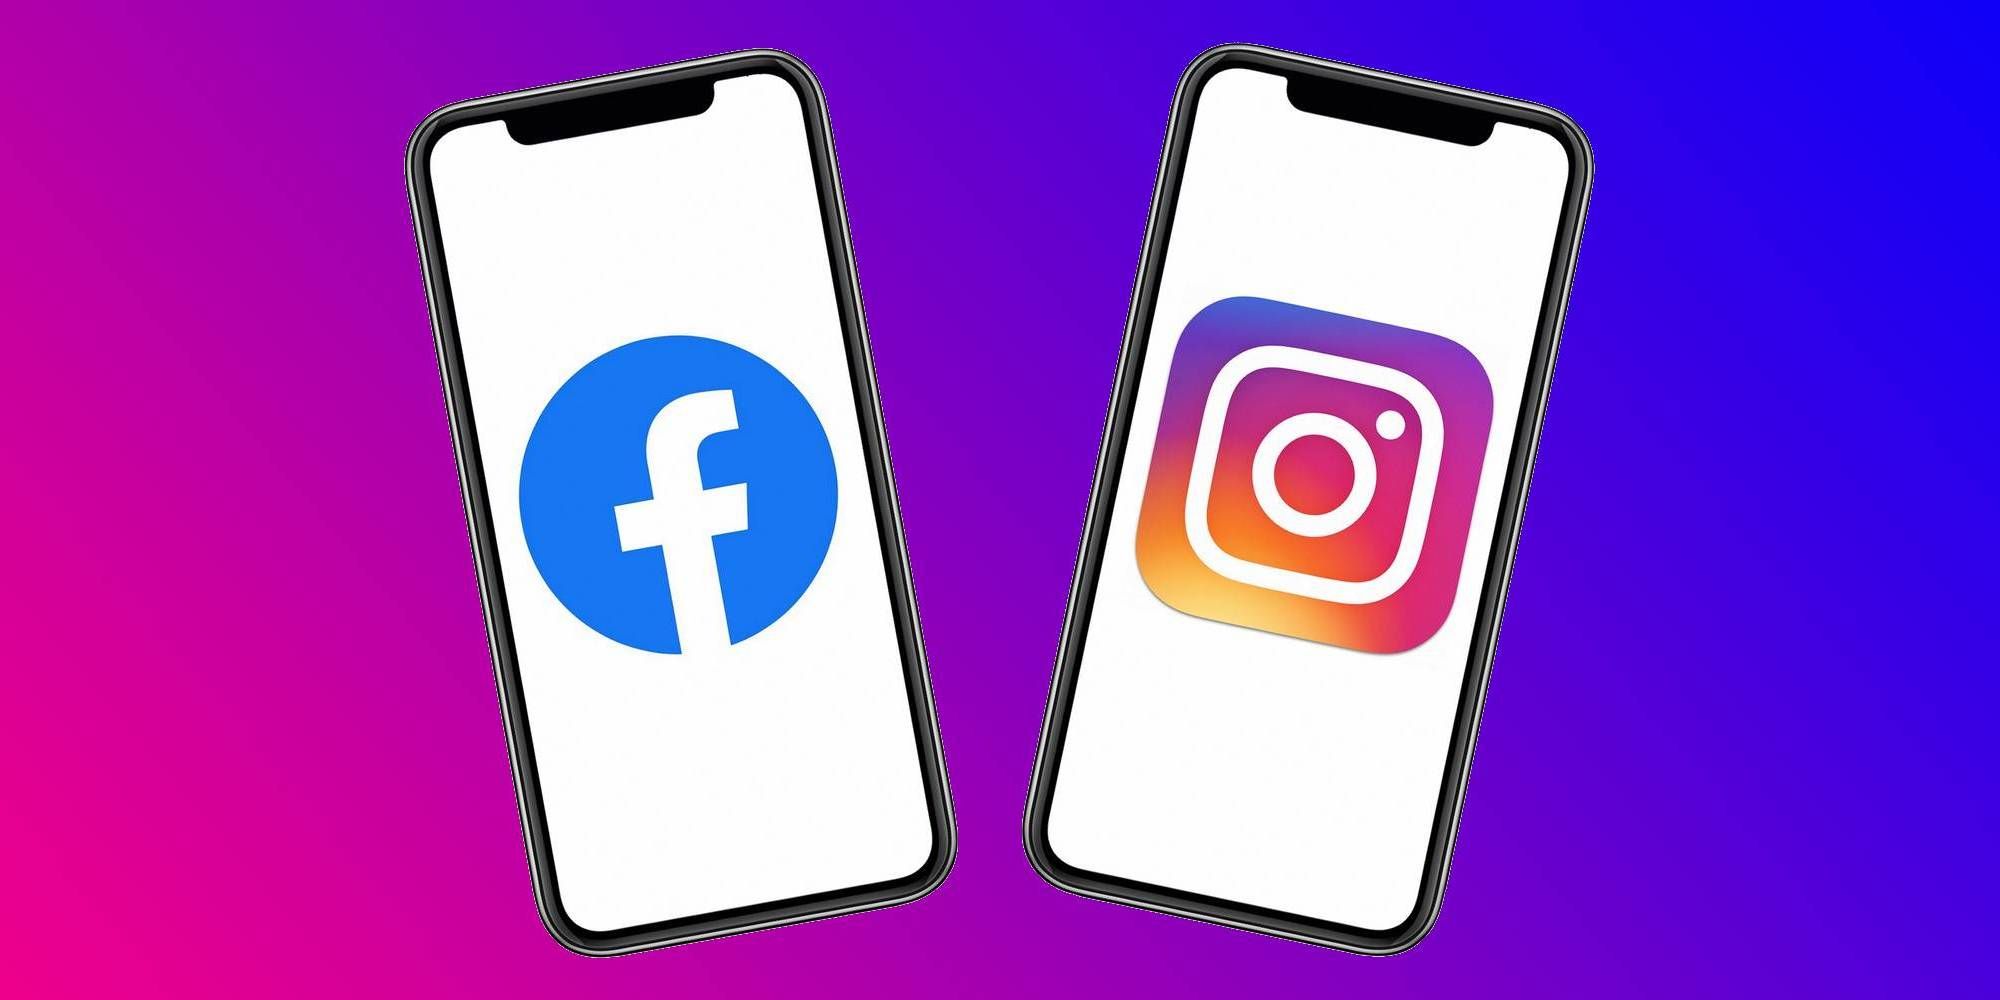 Facebook and Instagram logos on two smartphone screens against a pink, purple, and blue gradient background